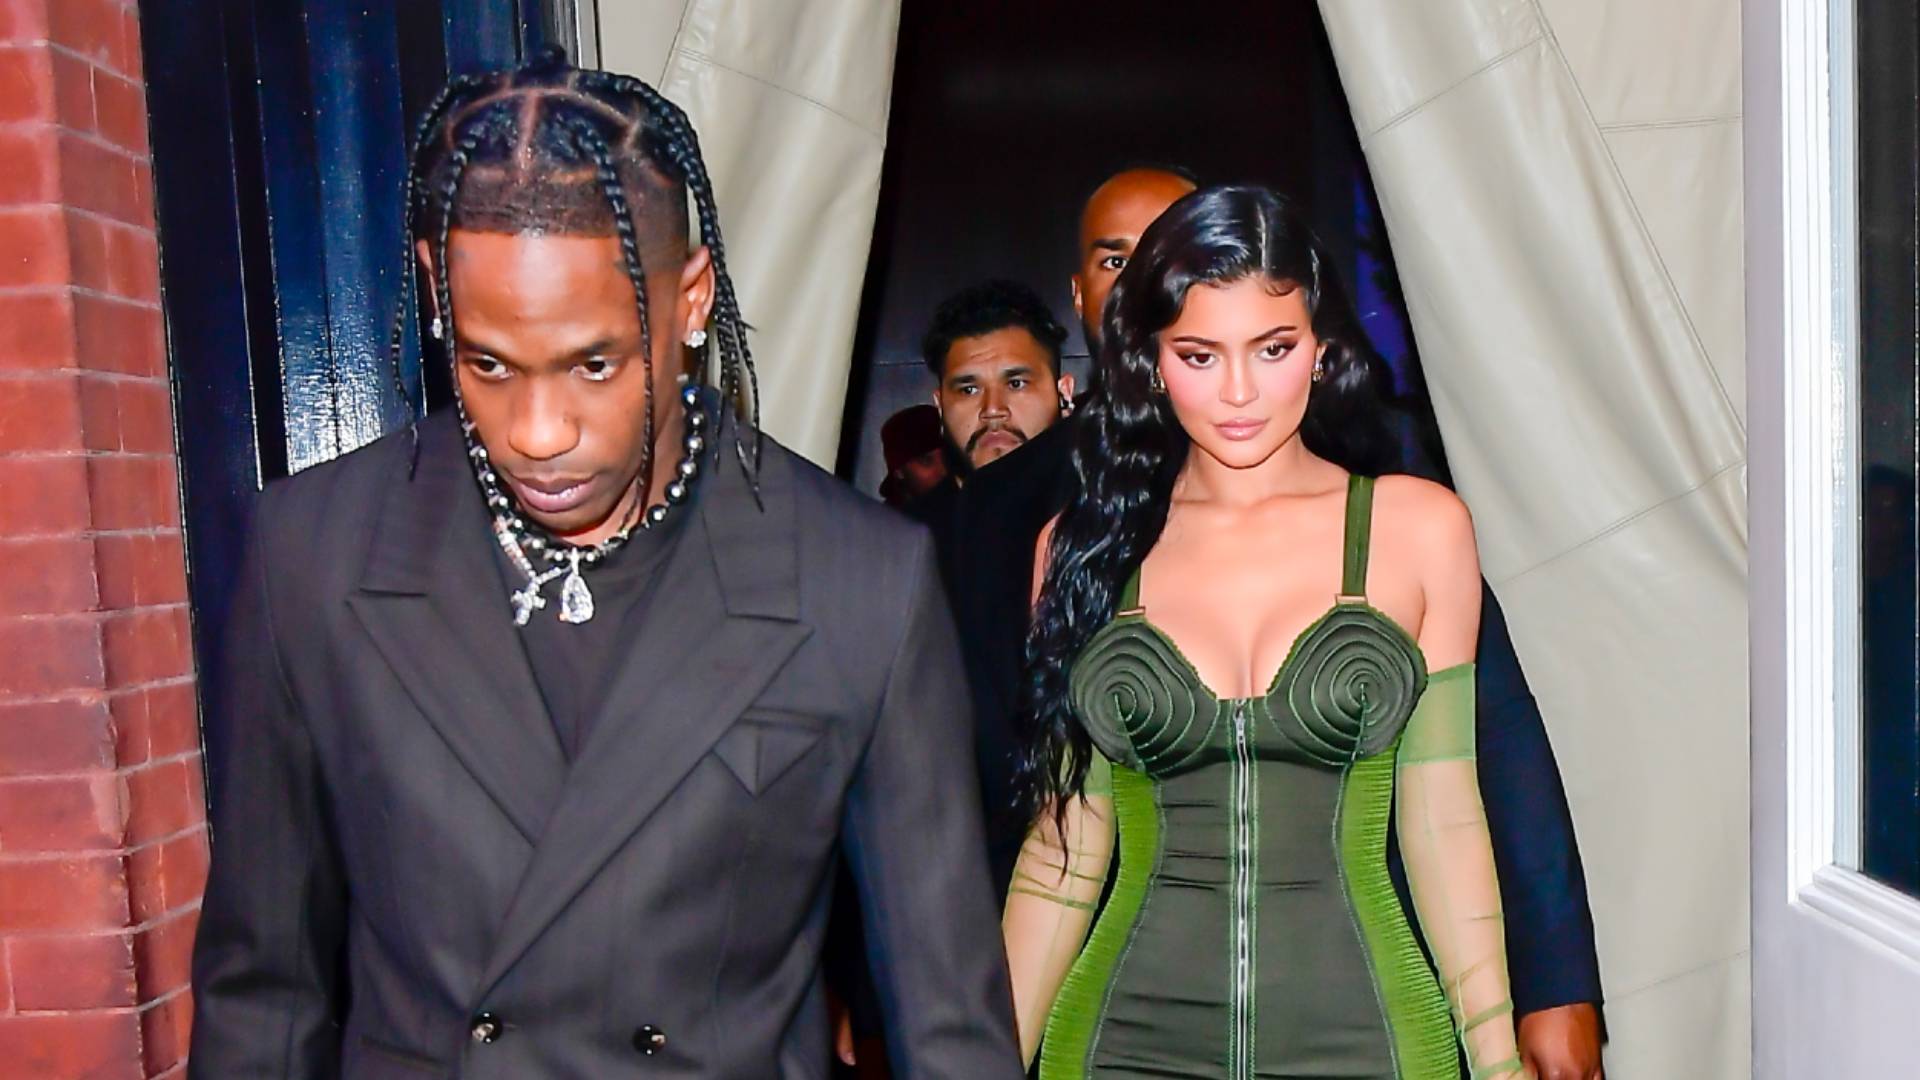 BREAKING EXCLUSIVE: Kylie Jenner is pregnant, expecting baby No. 2 with Travis Scott